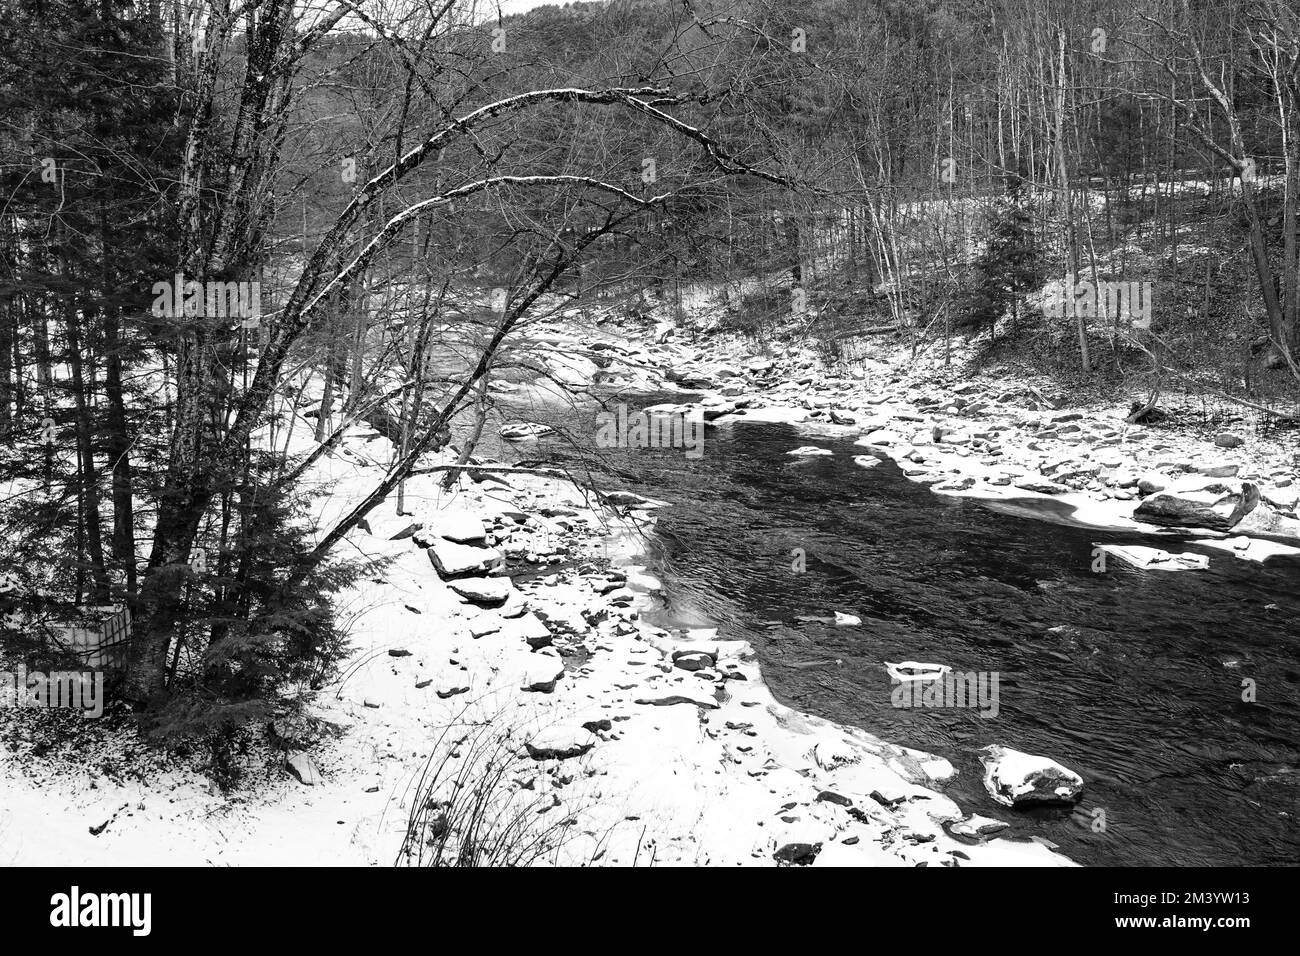 A river runs through a rural area in Vermont in mid-December surrounded by leafless trees and snow covered rocks Stock Photo